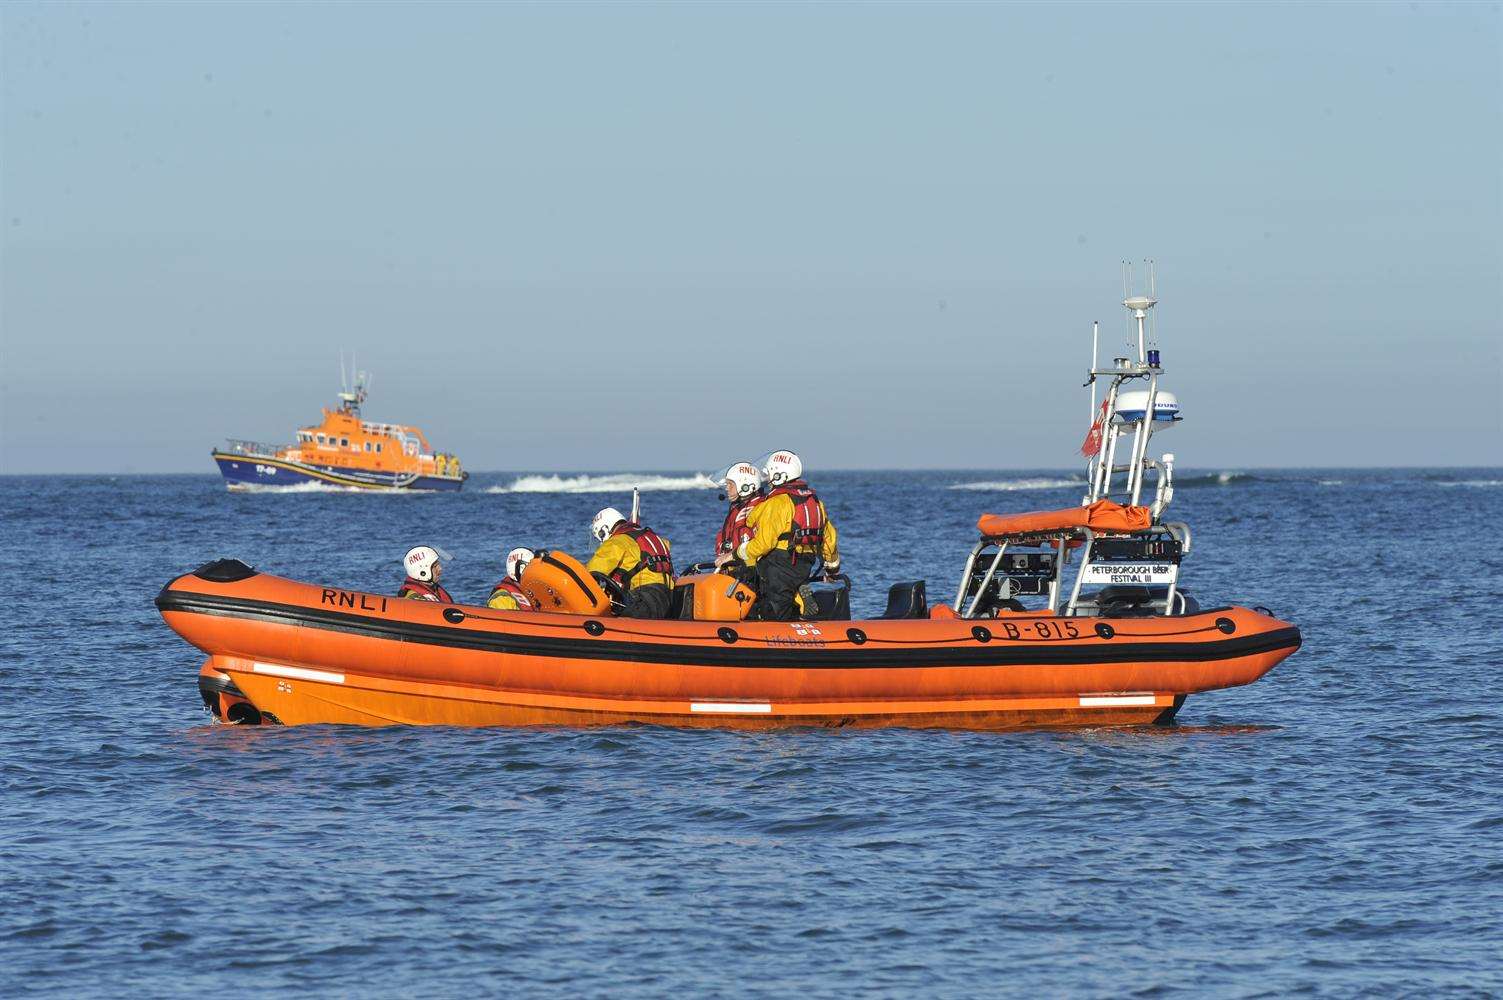 The RNLI and HM Coastguard will give a sea rescue demonstration at the Party on the Prom